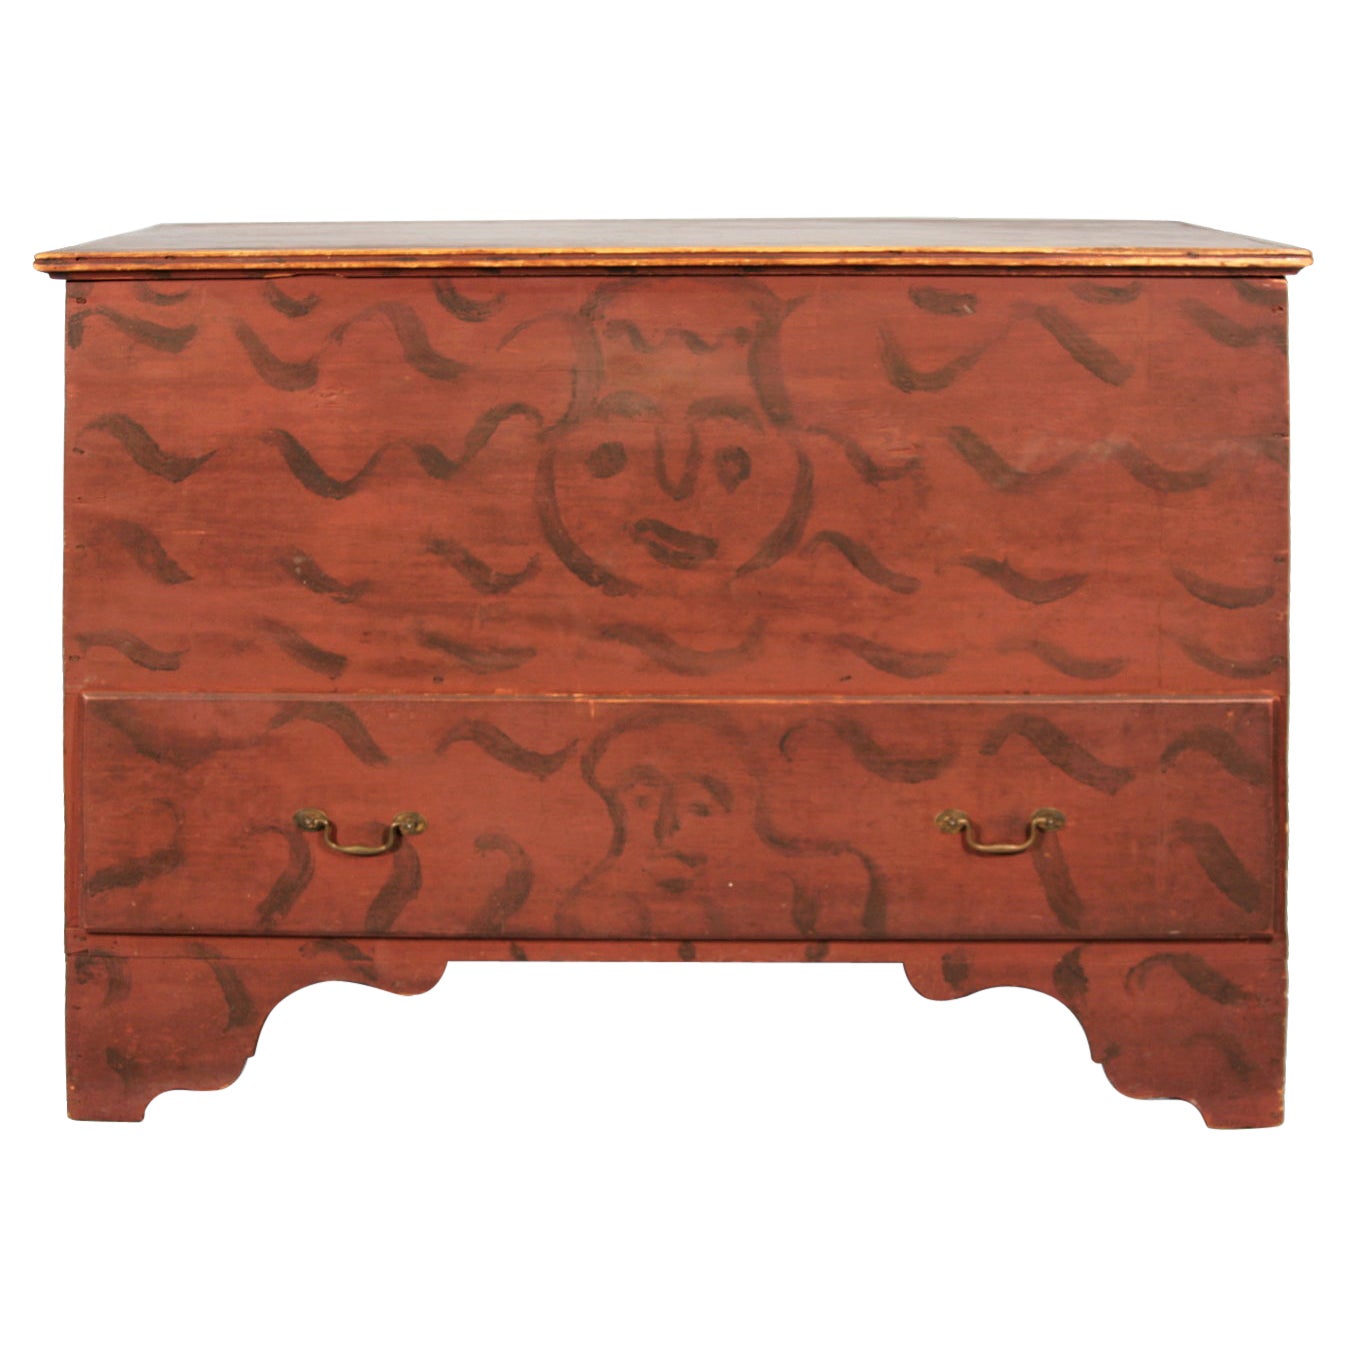 Queen Anne Period Blanket Chest with Two Whimsical Faces, ca 1740-1760 For Sale